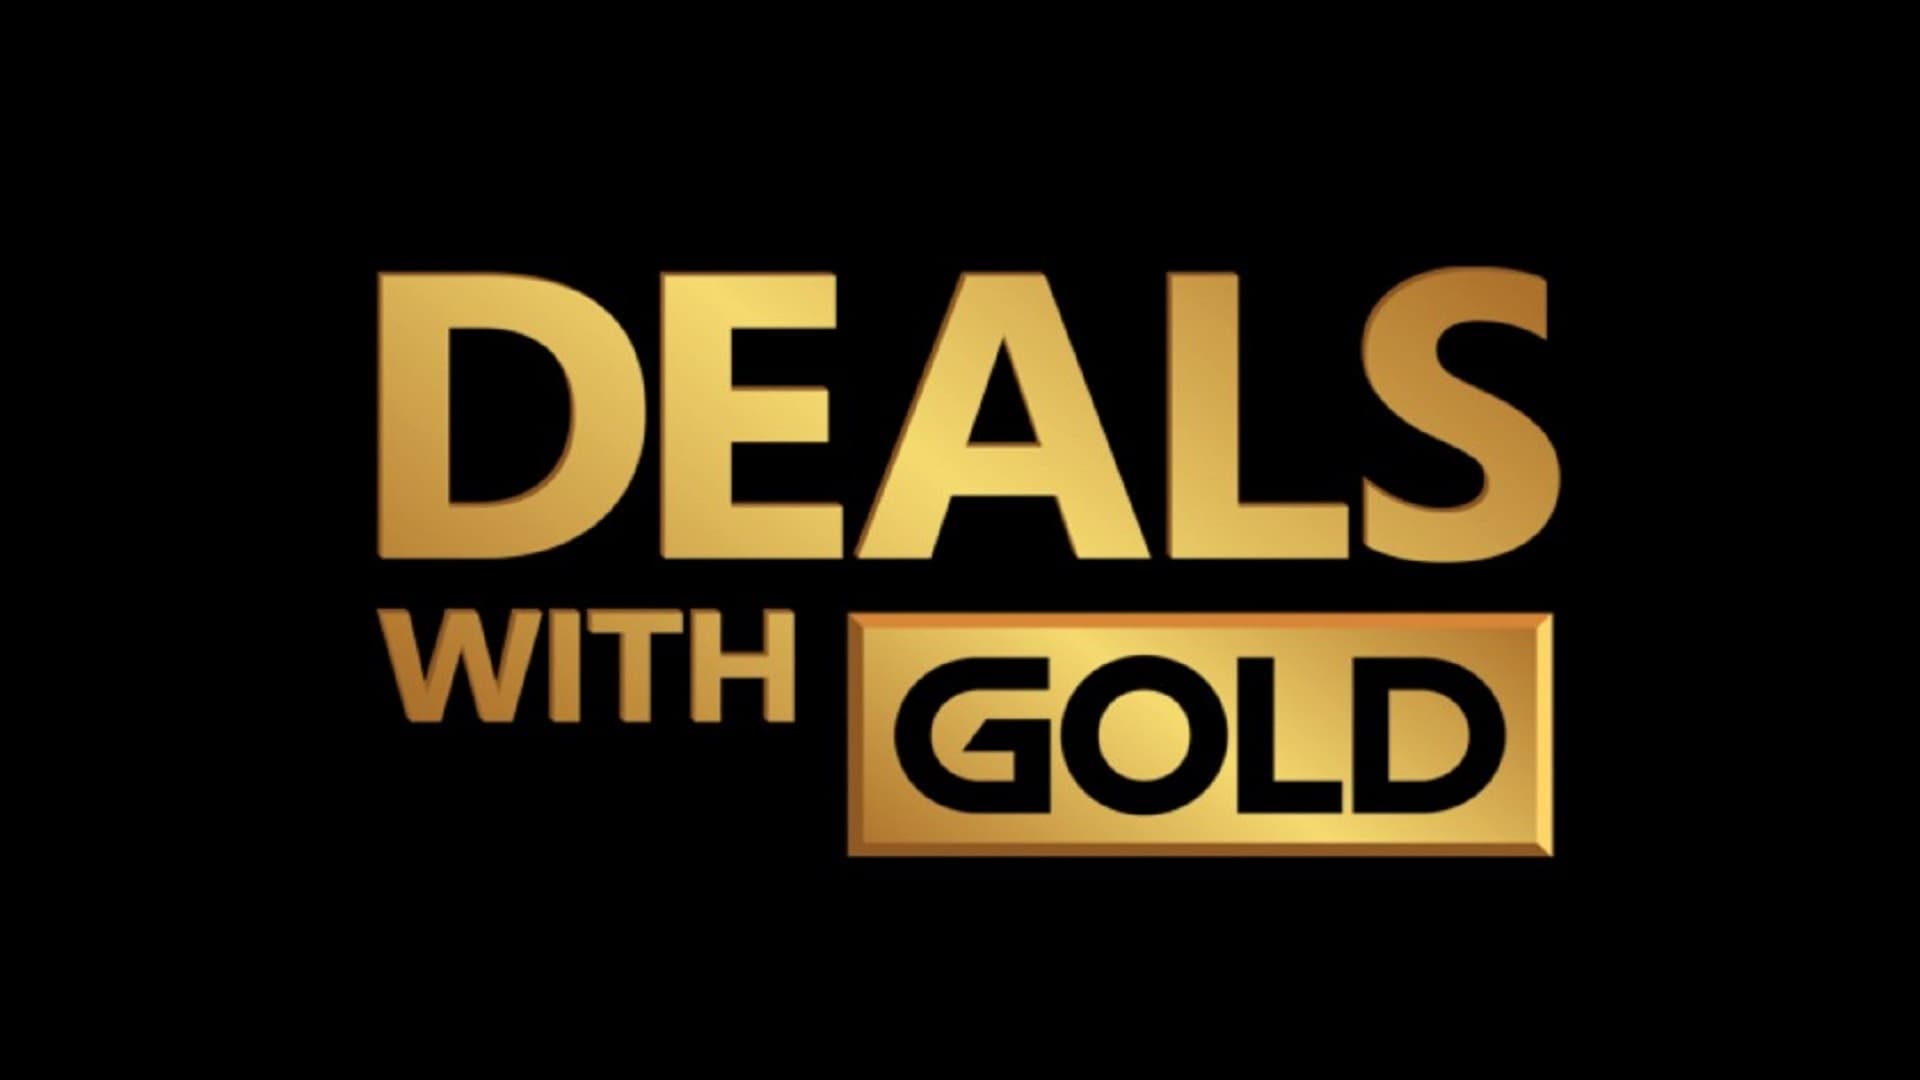 Deals with Gold semaine 05